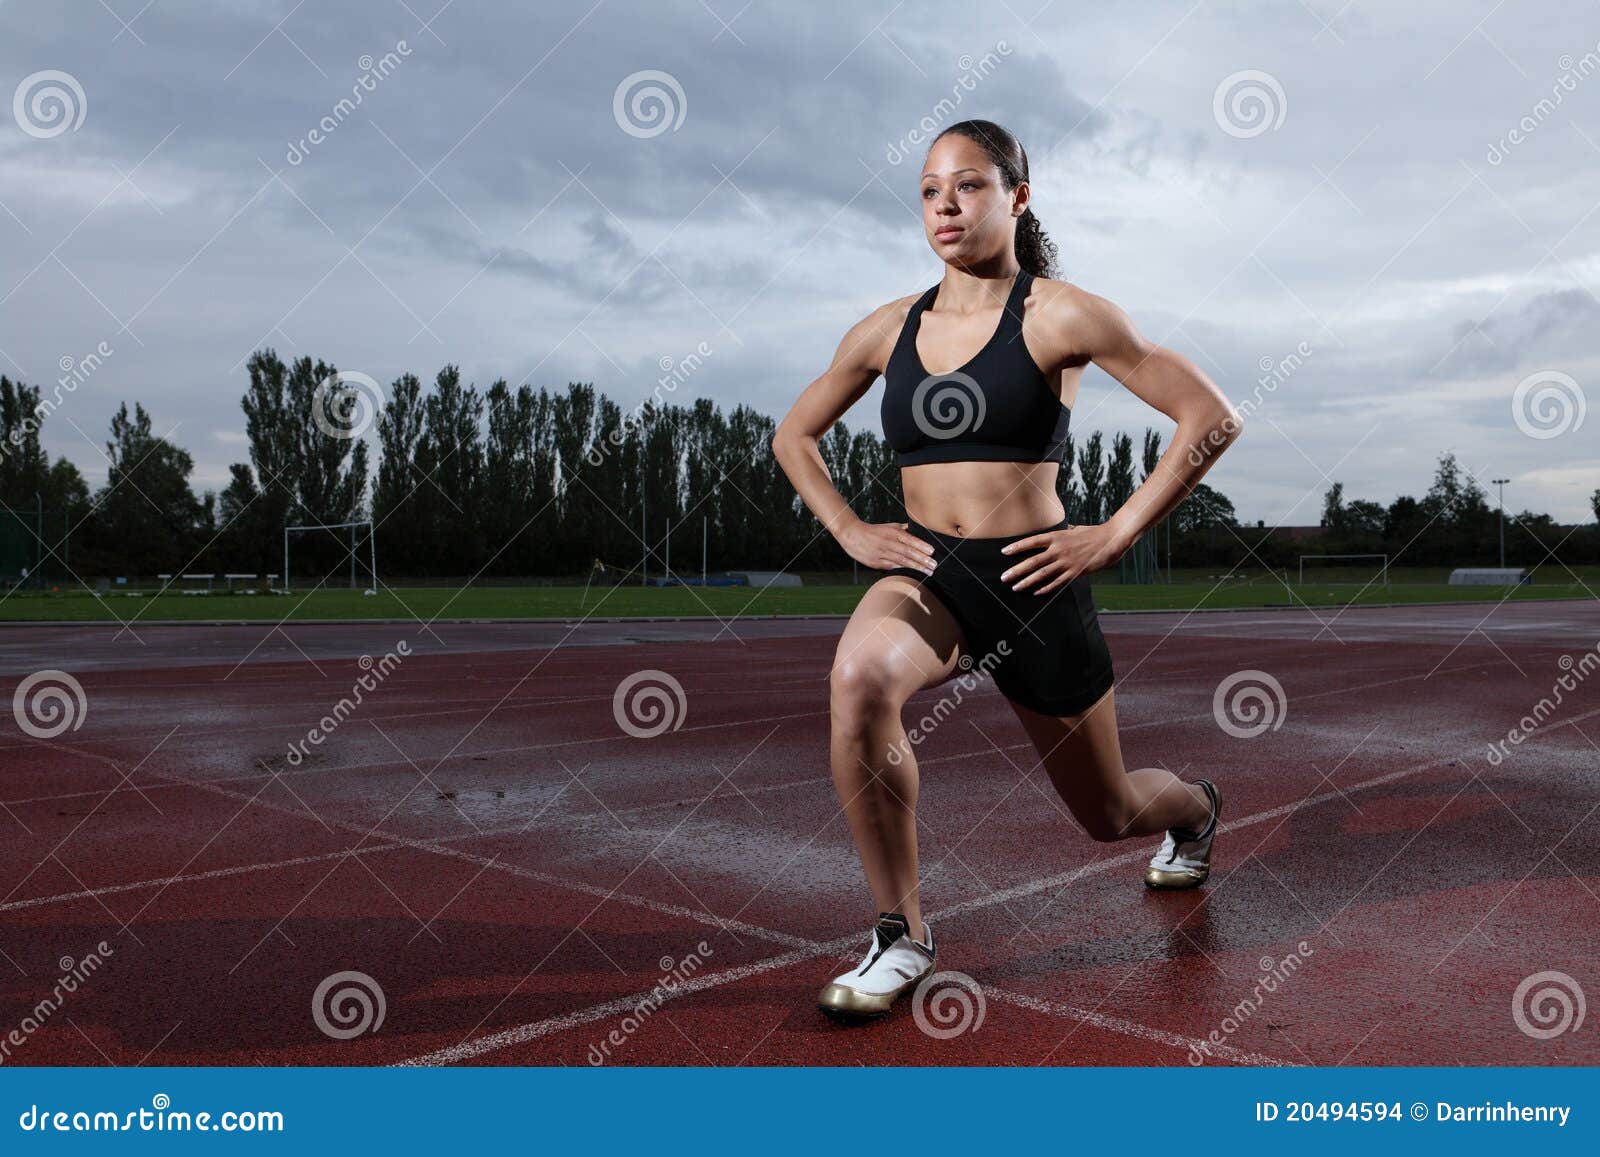 lunge exercise for quadriceps by athlete on track